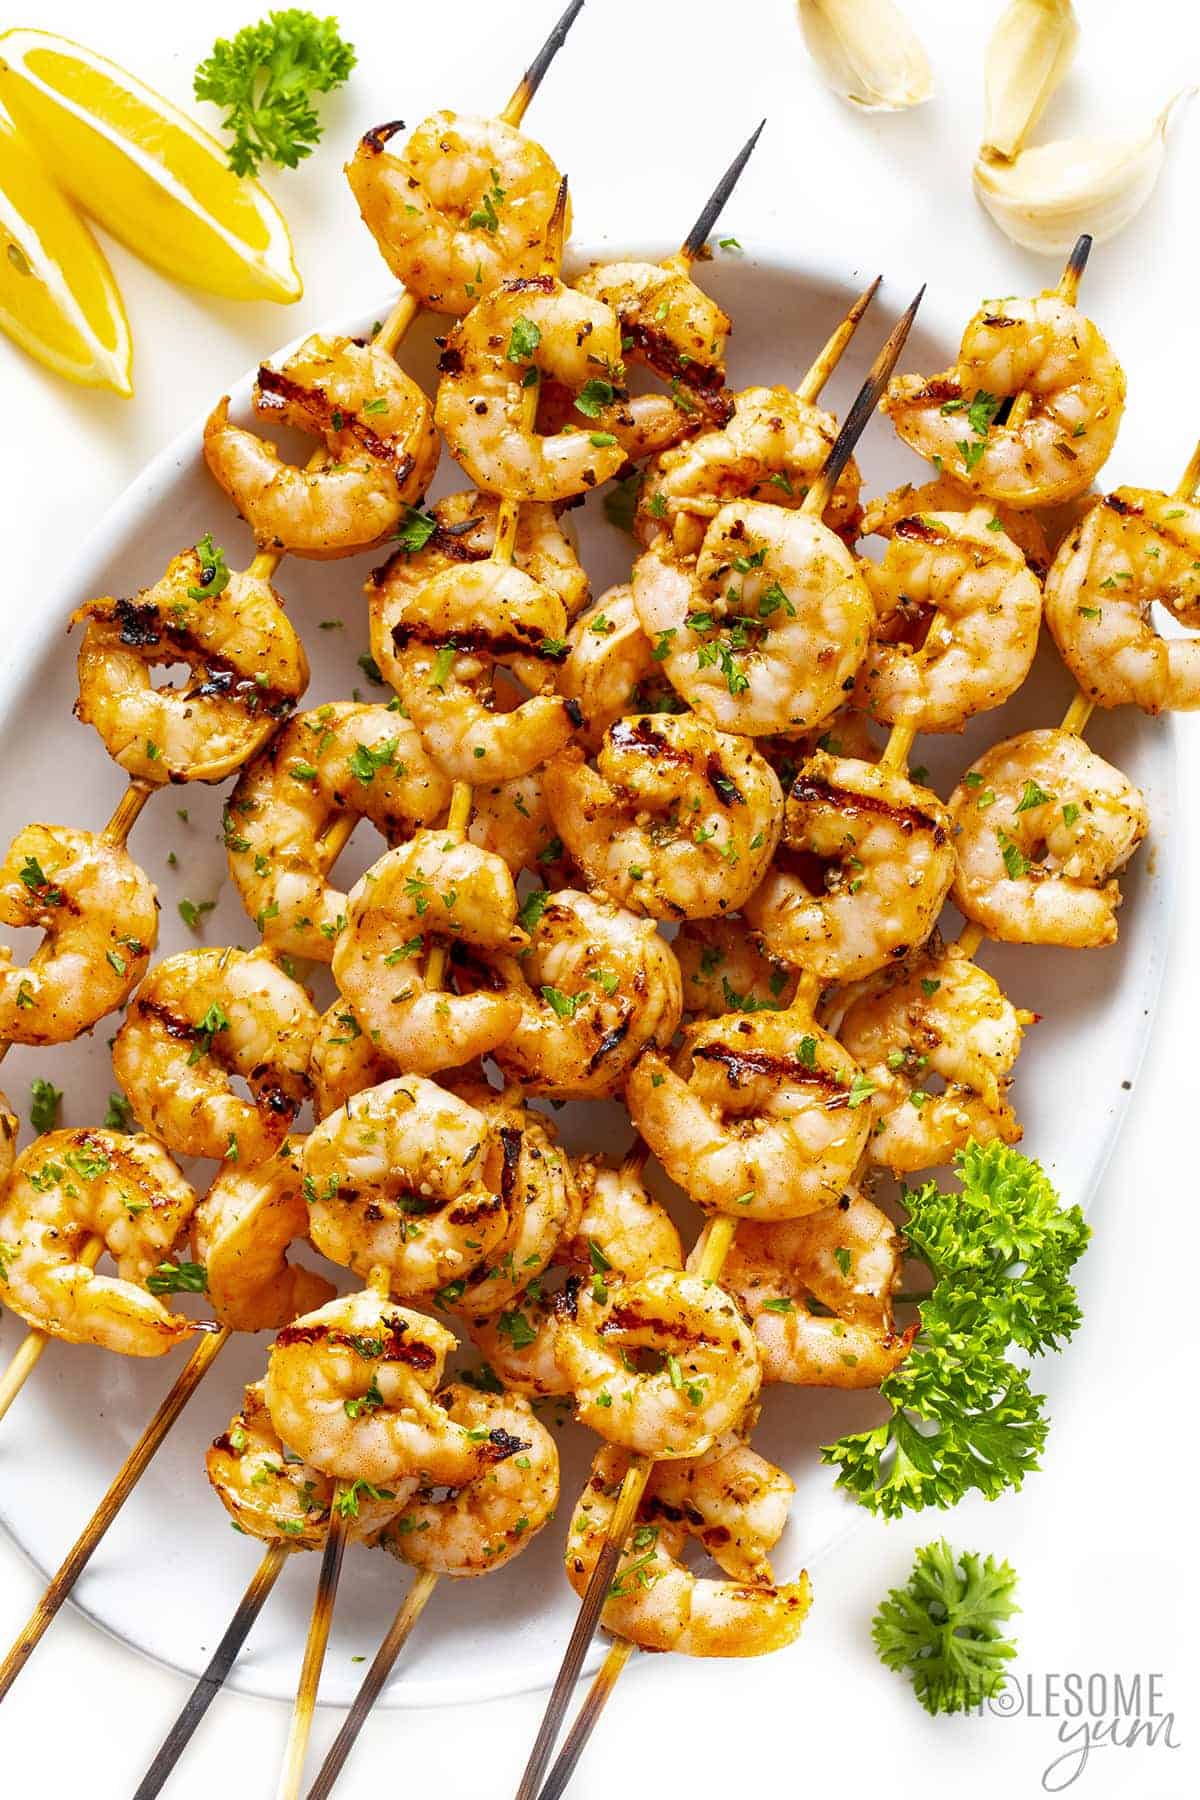 Finished shrimp skewers recipe on a plate with fresh lemon and herbs